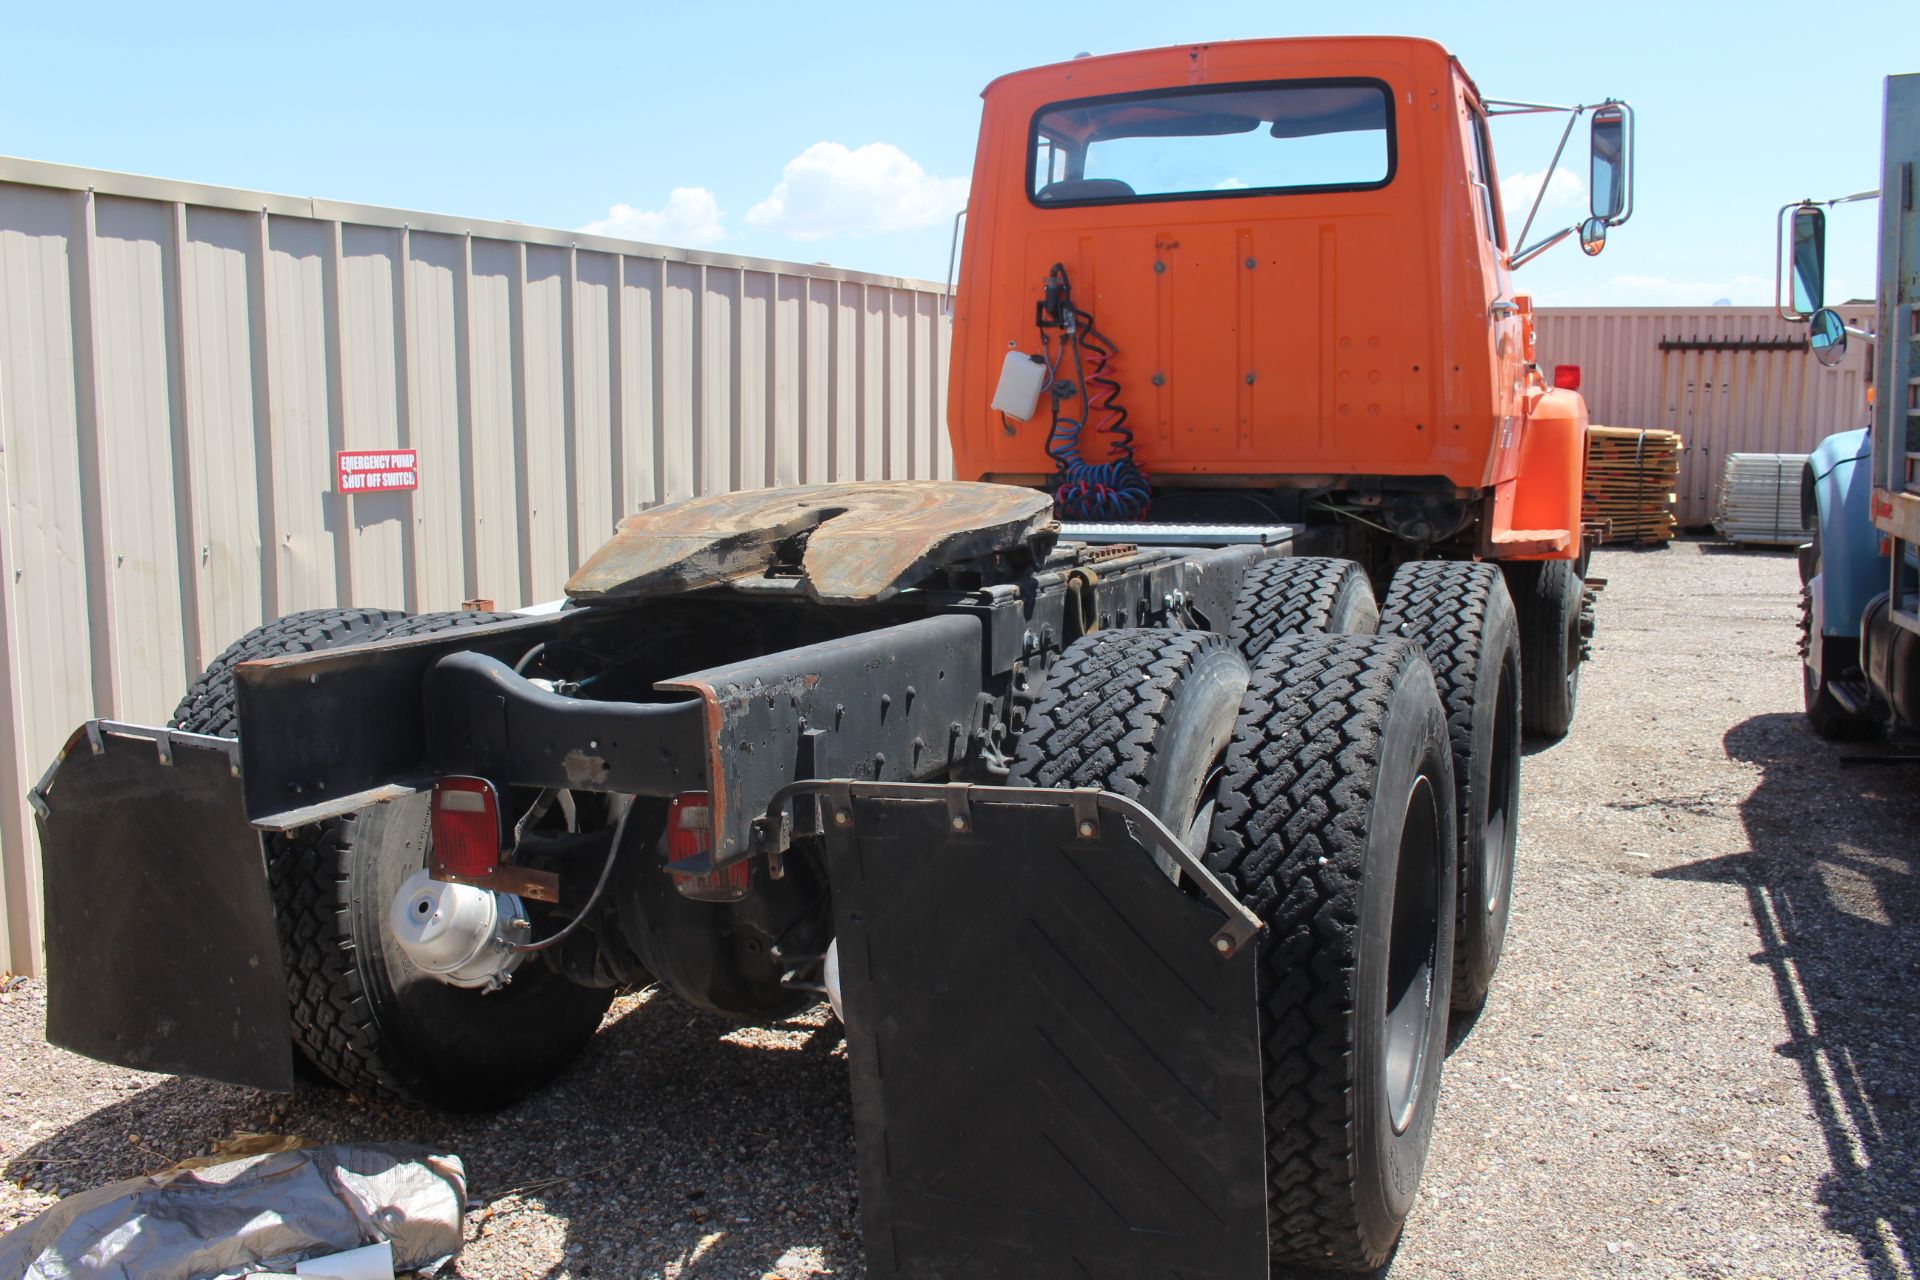 1980 FORD TRACTOR TRUCK, MODEL 9000, DIESEL (Damaged, see pictures); LOCATED IN FORT MOJAVE, AZ. - Image 4 of 8